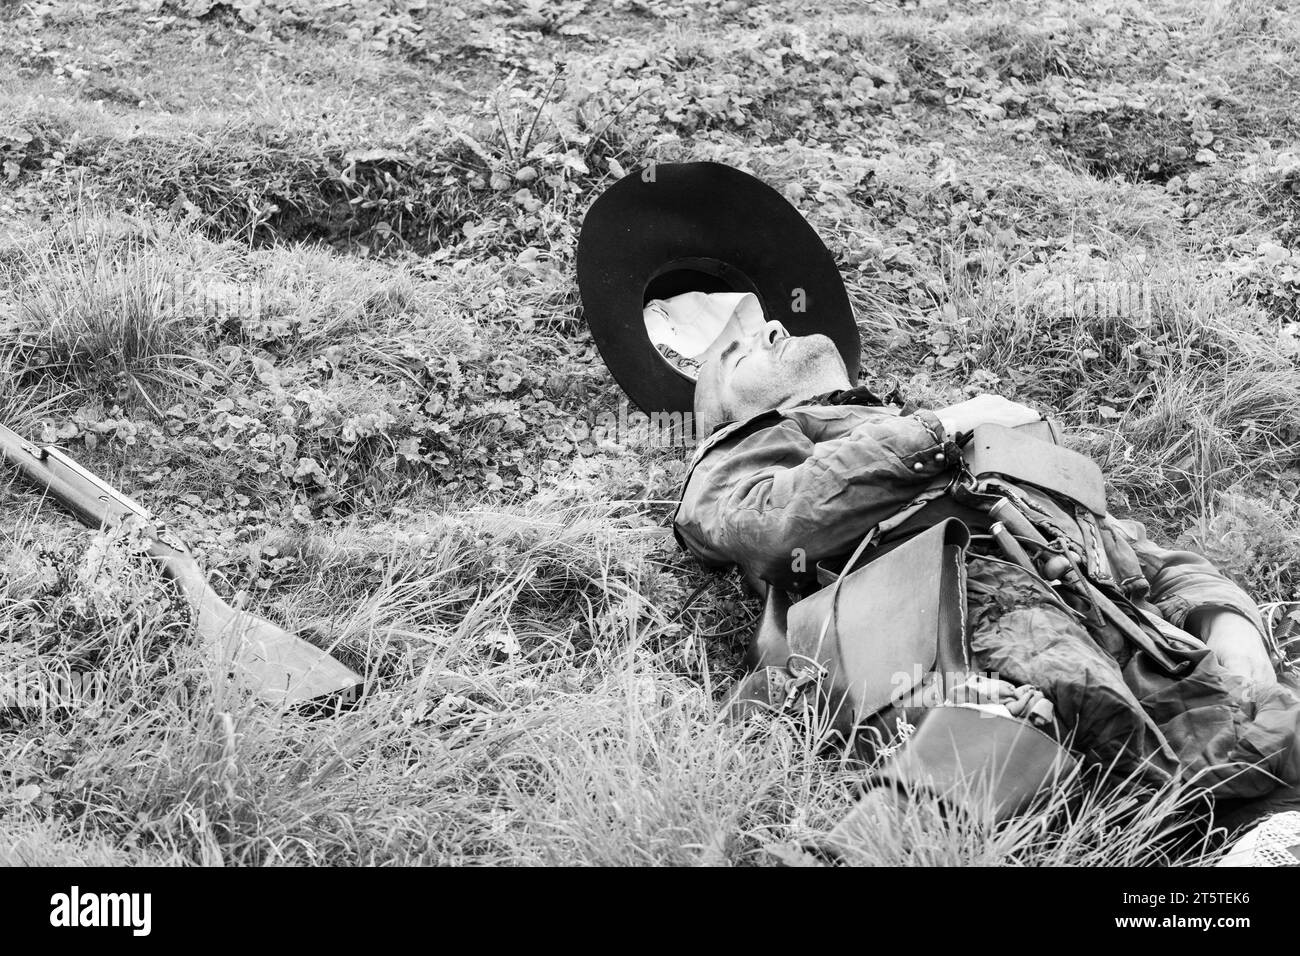 Musketeer playing dead during a reenactment of the Siege of Basing House, English civil war by the English Civil War Society 16.09.23, Basingstoke Stock Photo